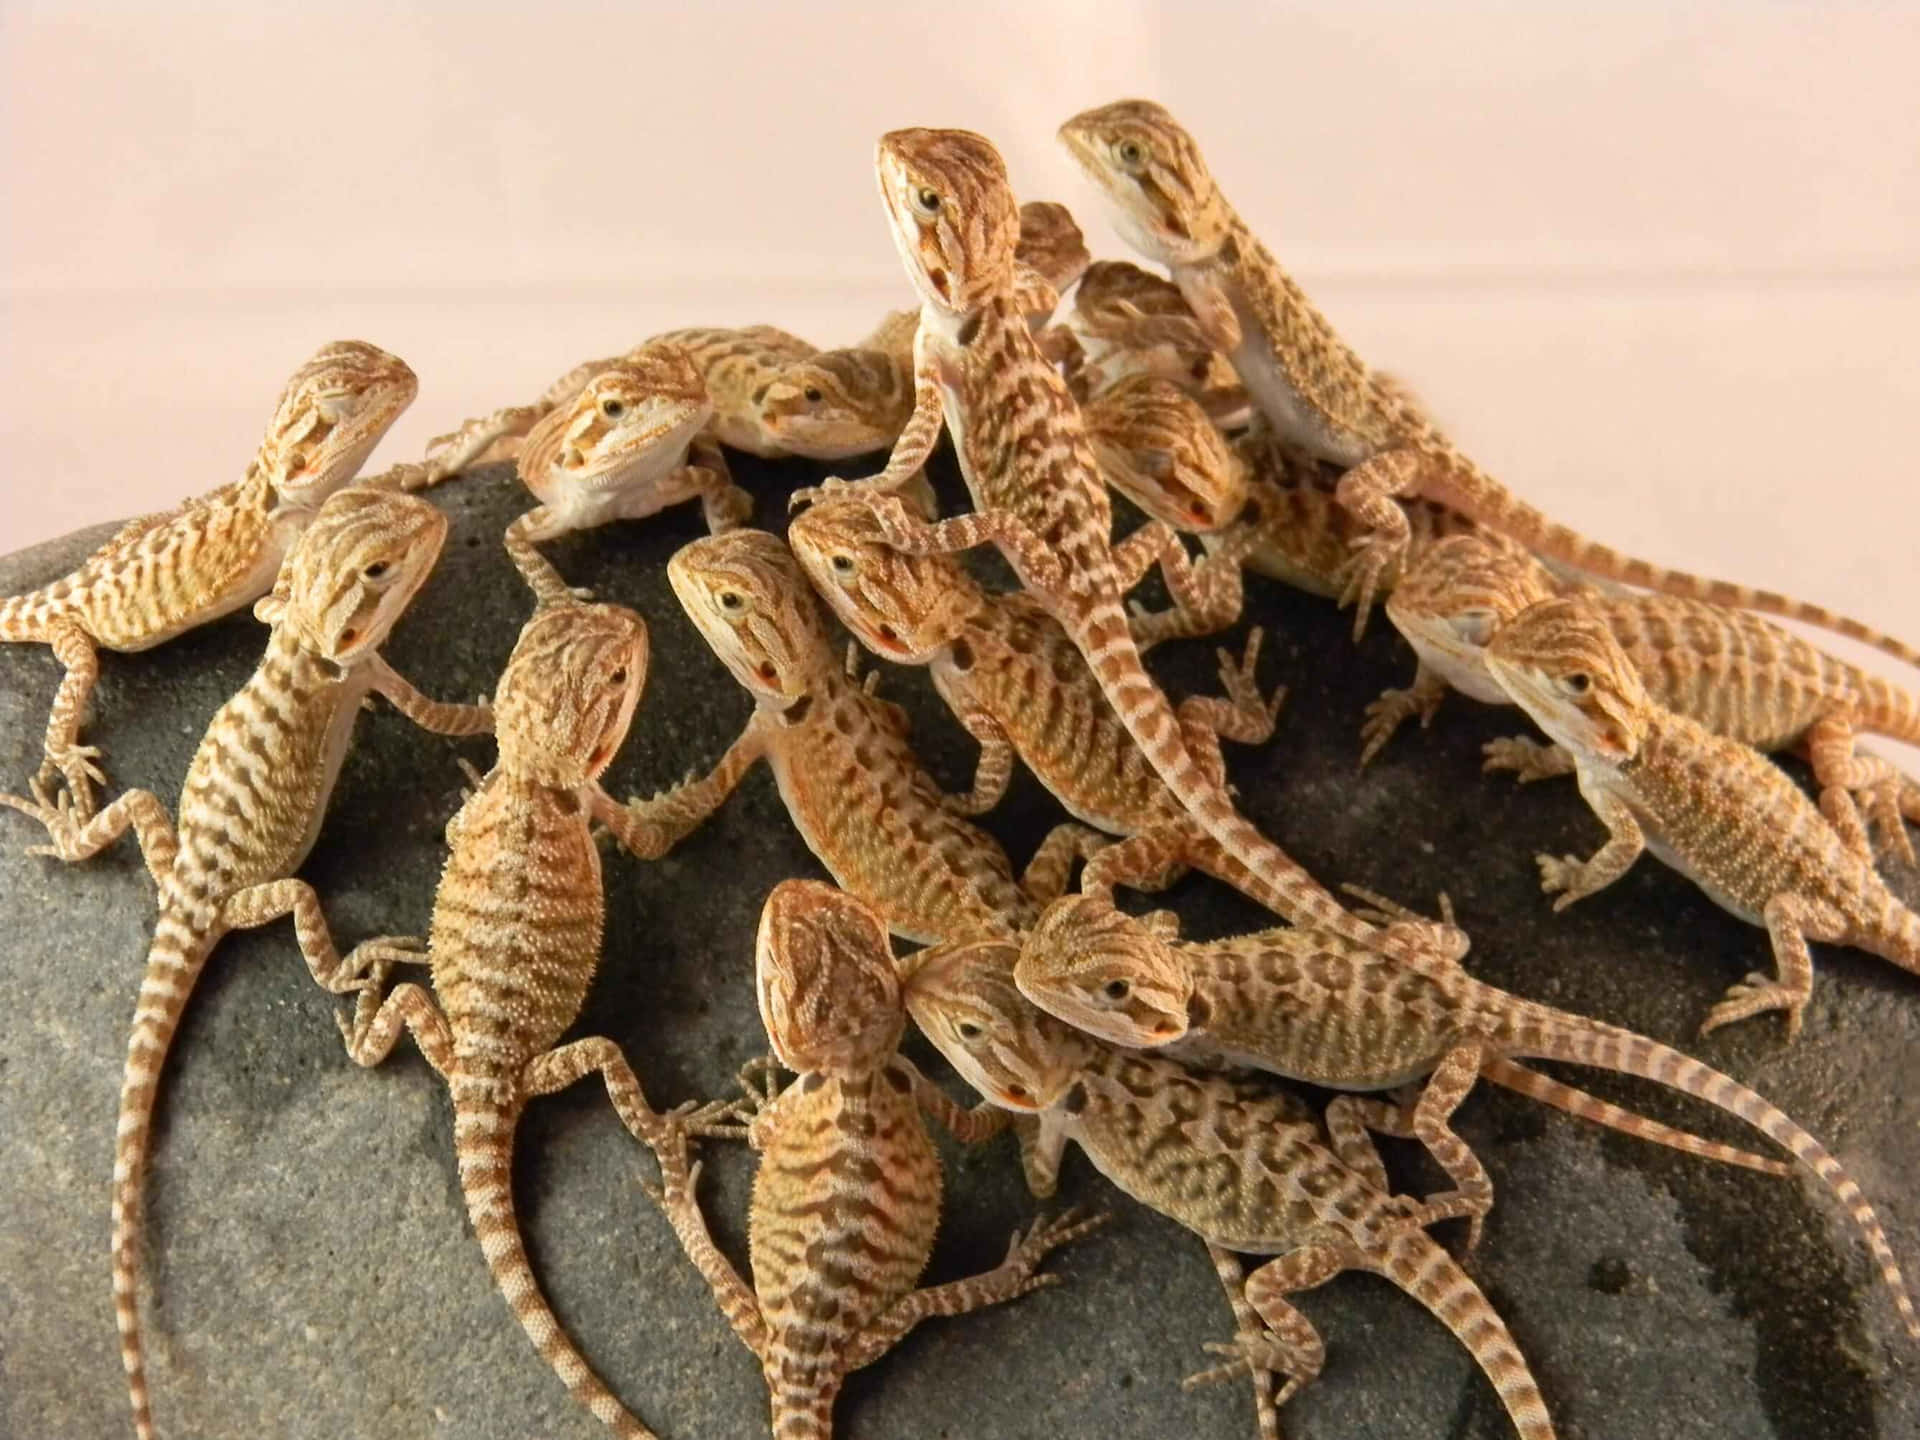 Groupof Bearded Dragons Background